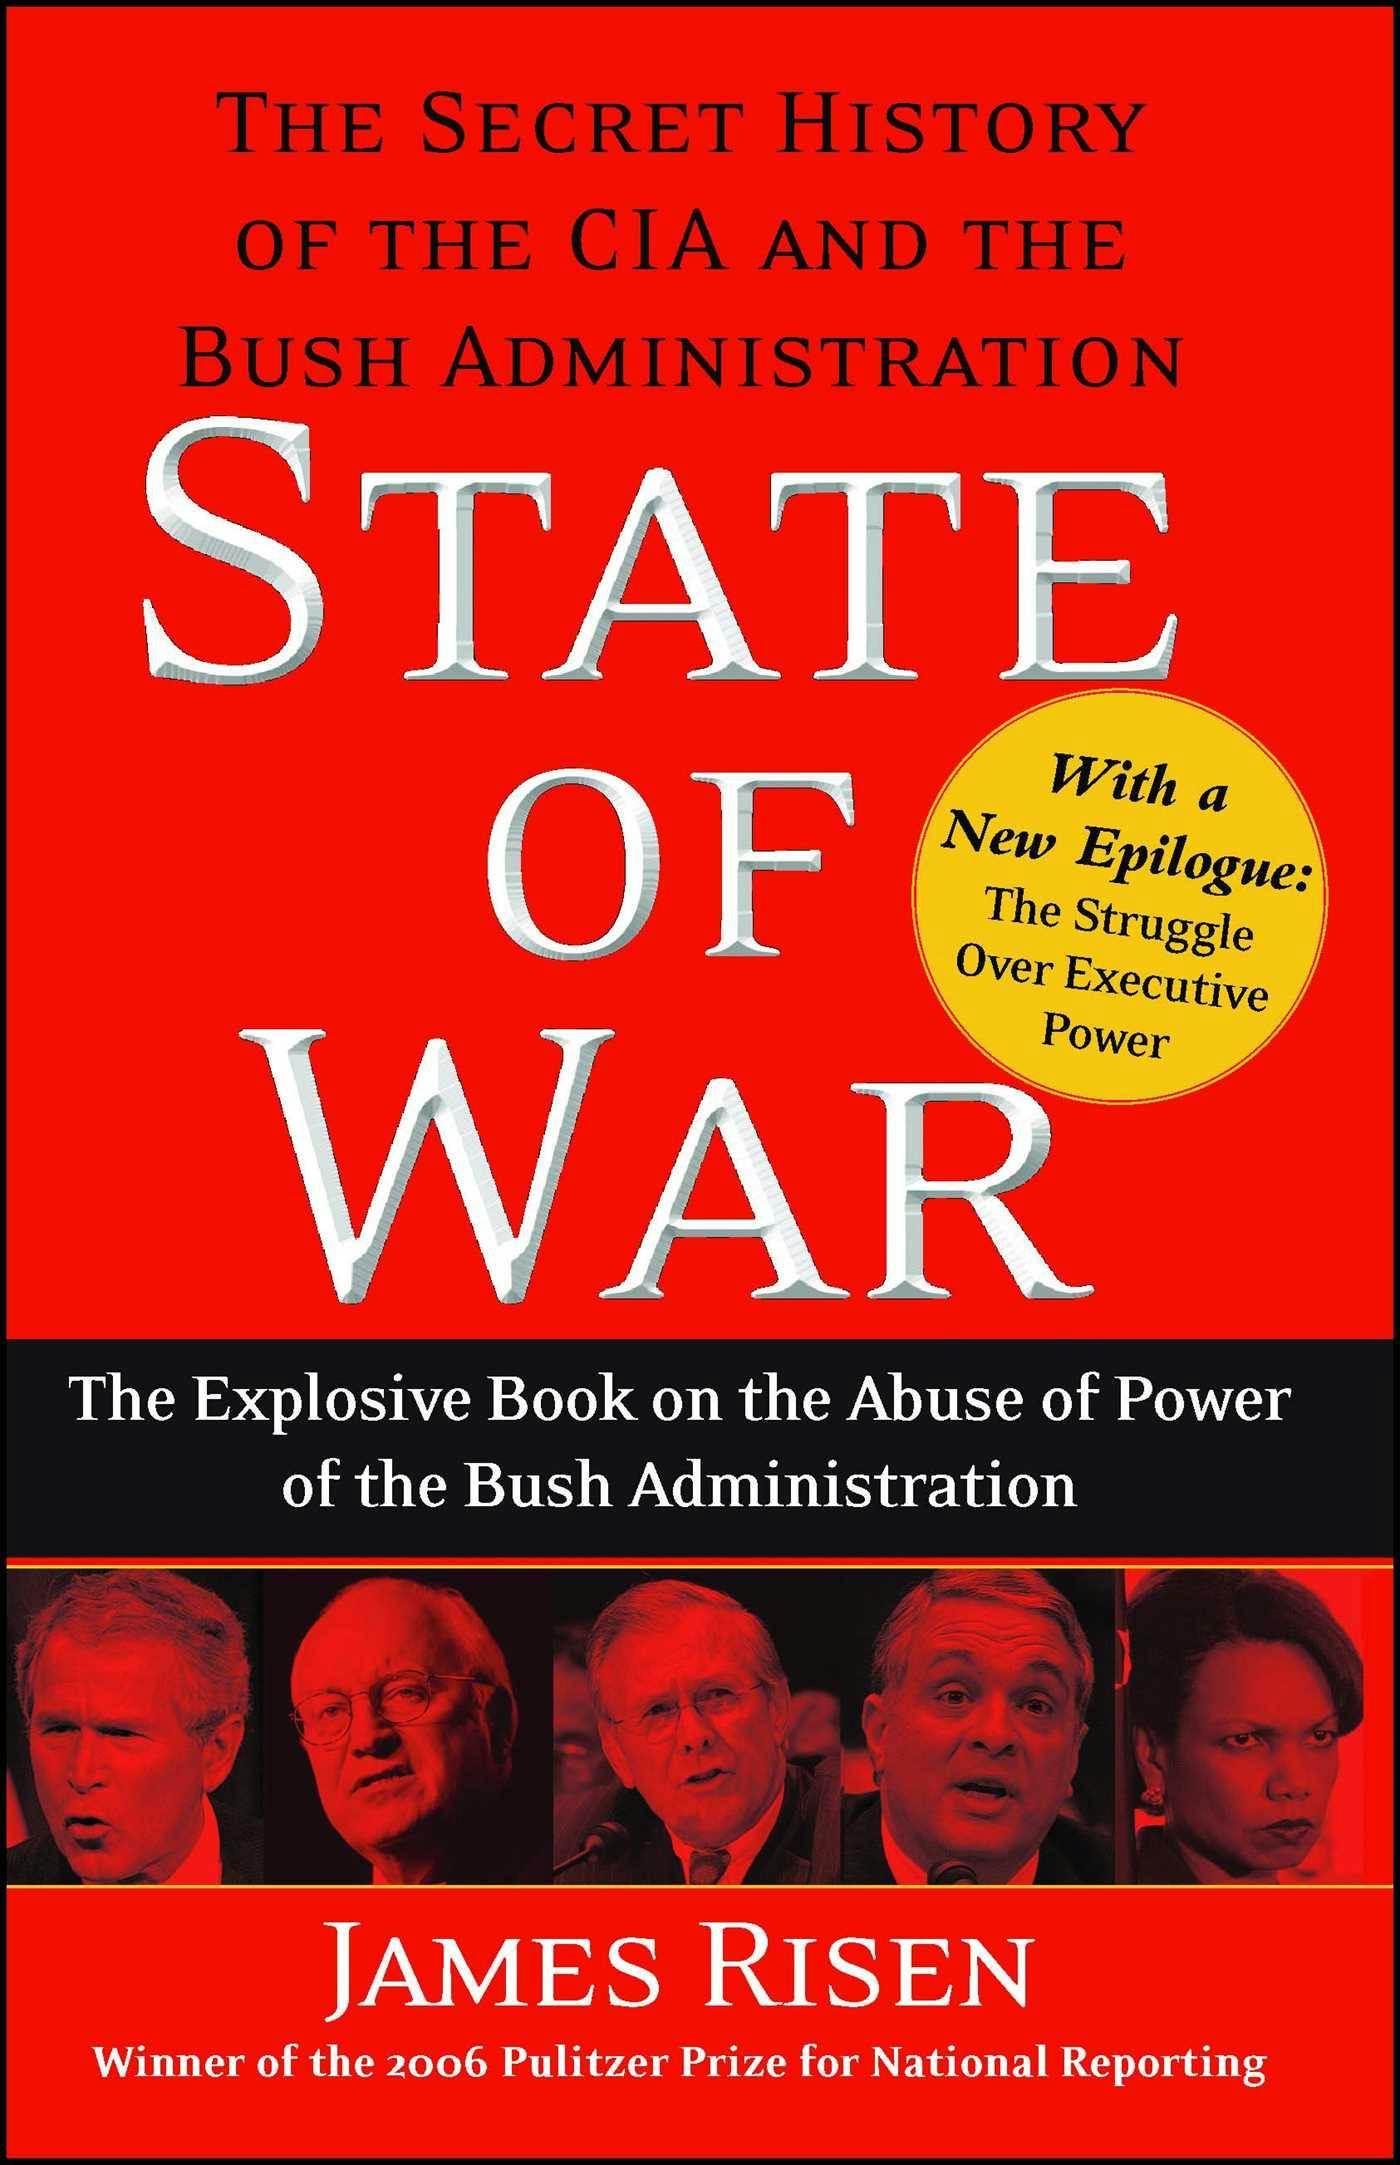 State of War: The Secret History of the C.I.A. and the Bush Administration - undefined